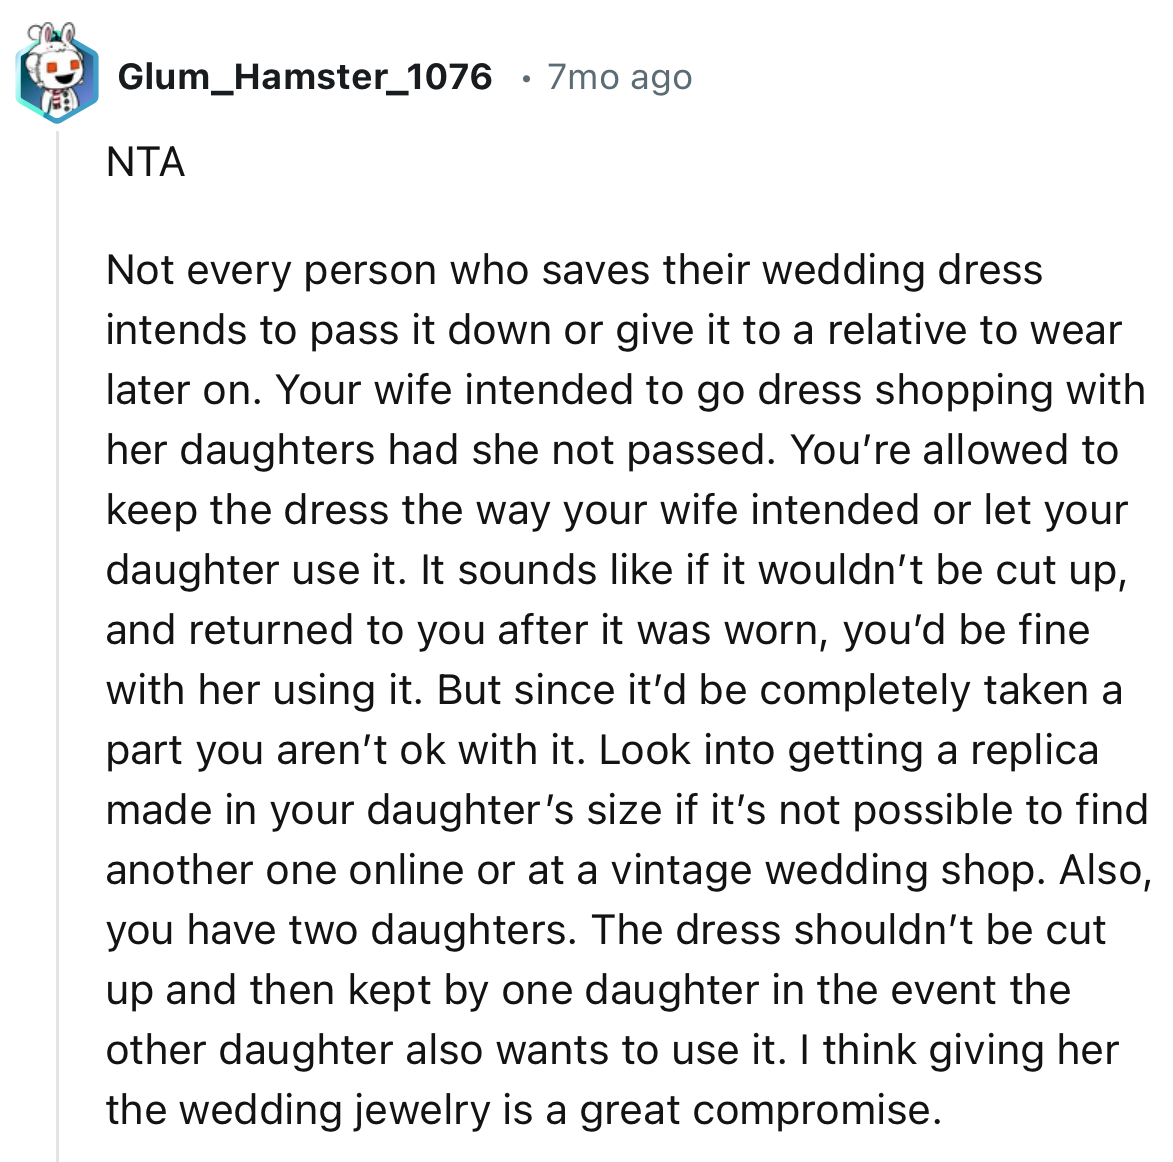 “Not every person who saves their wedding dress intends to pass it down or give it to a relative to wear later on.”